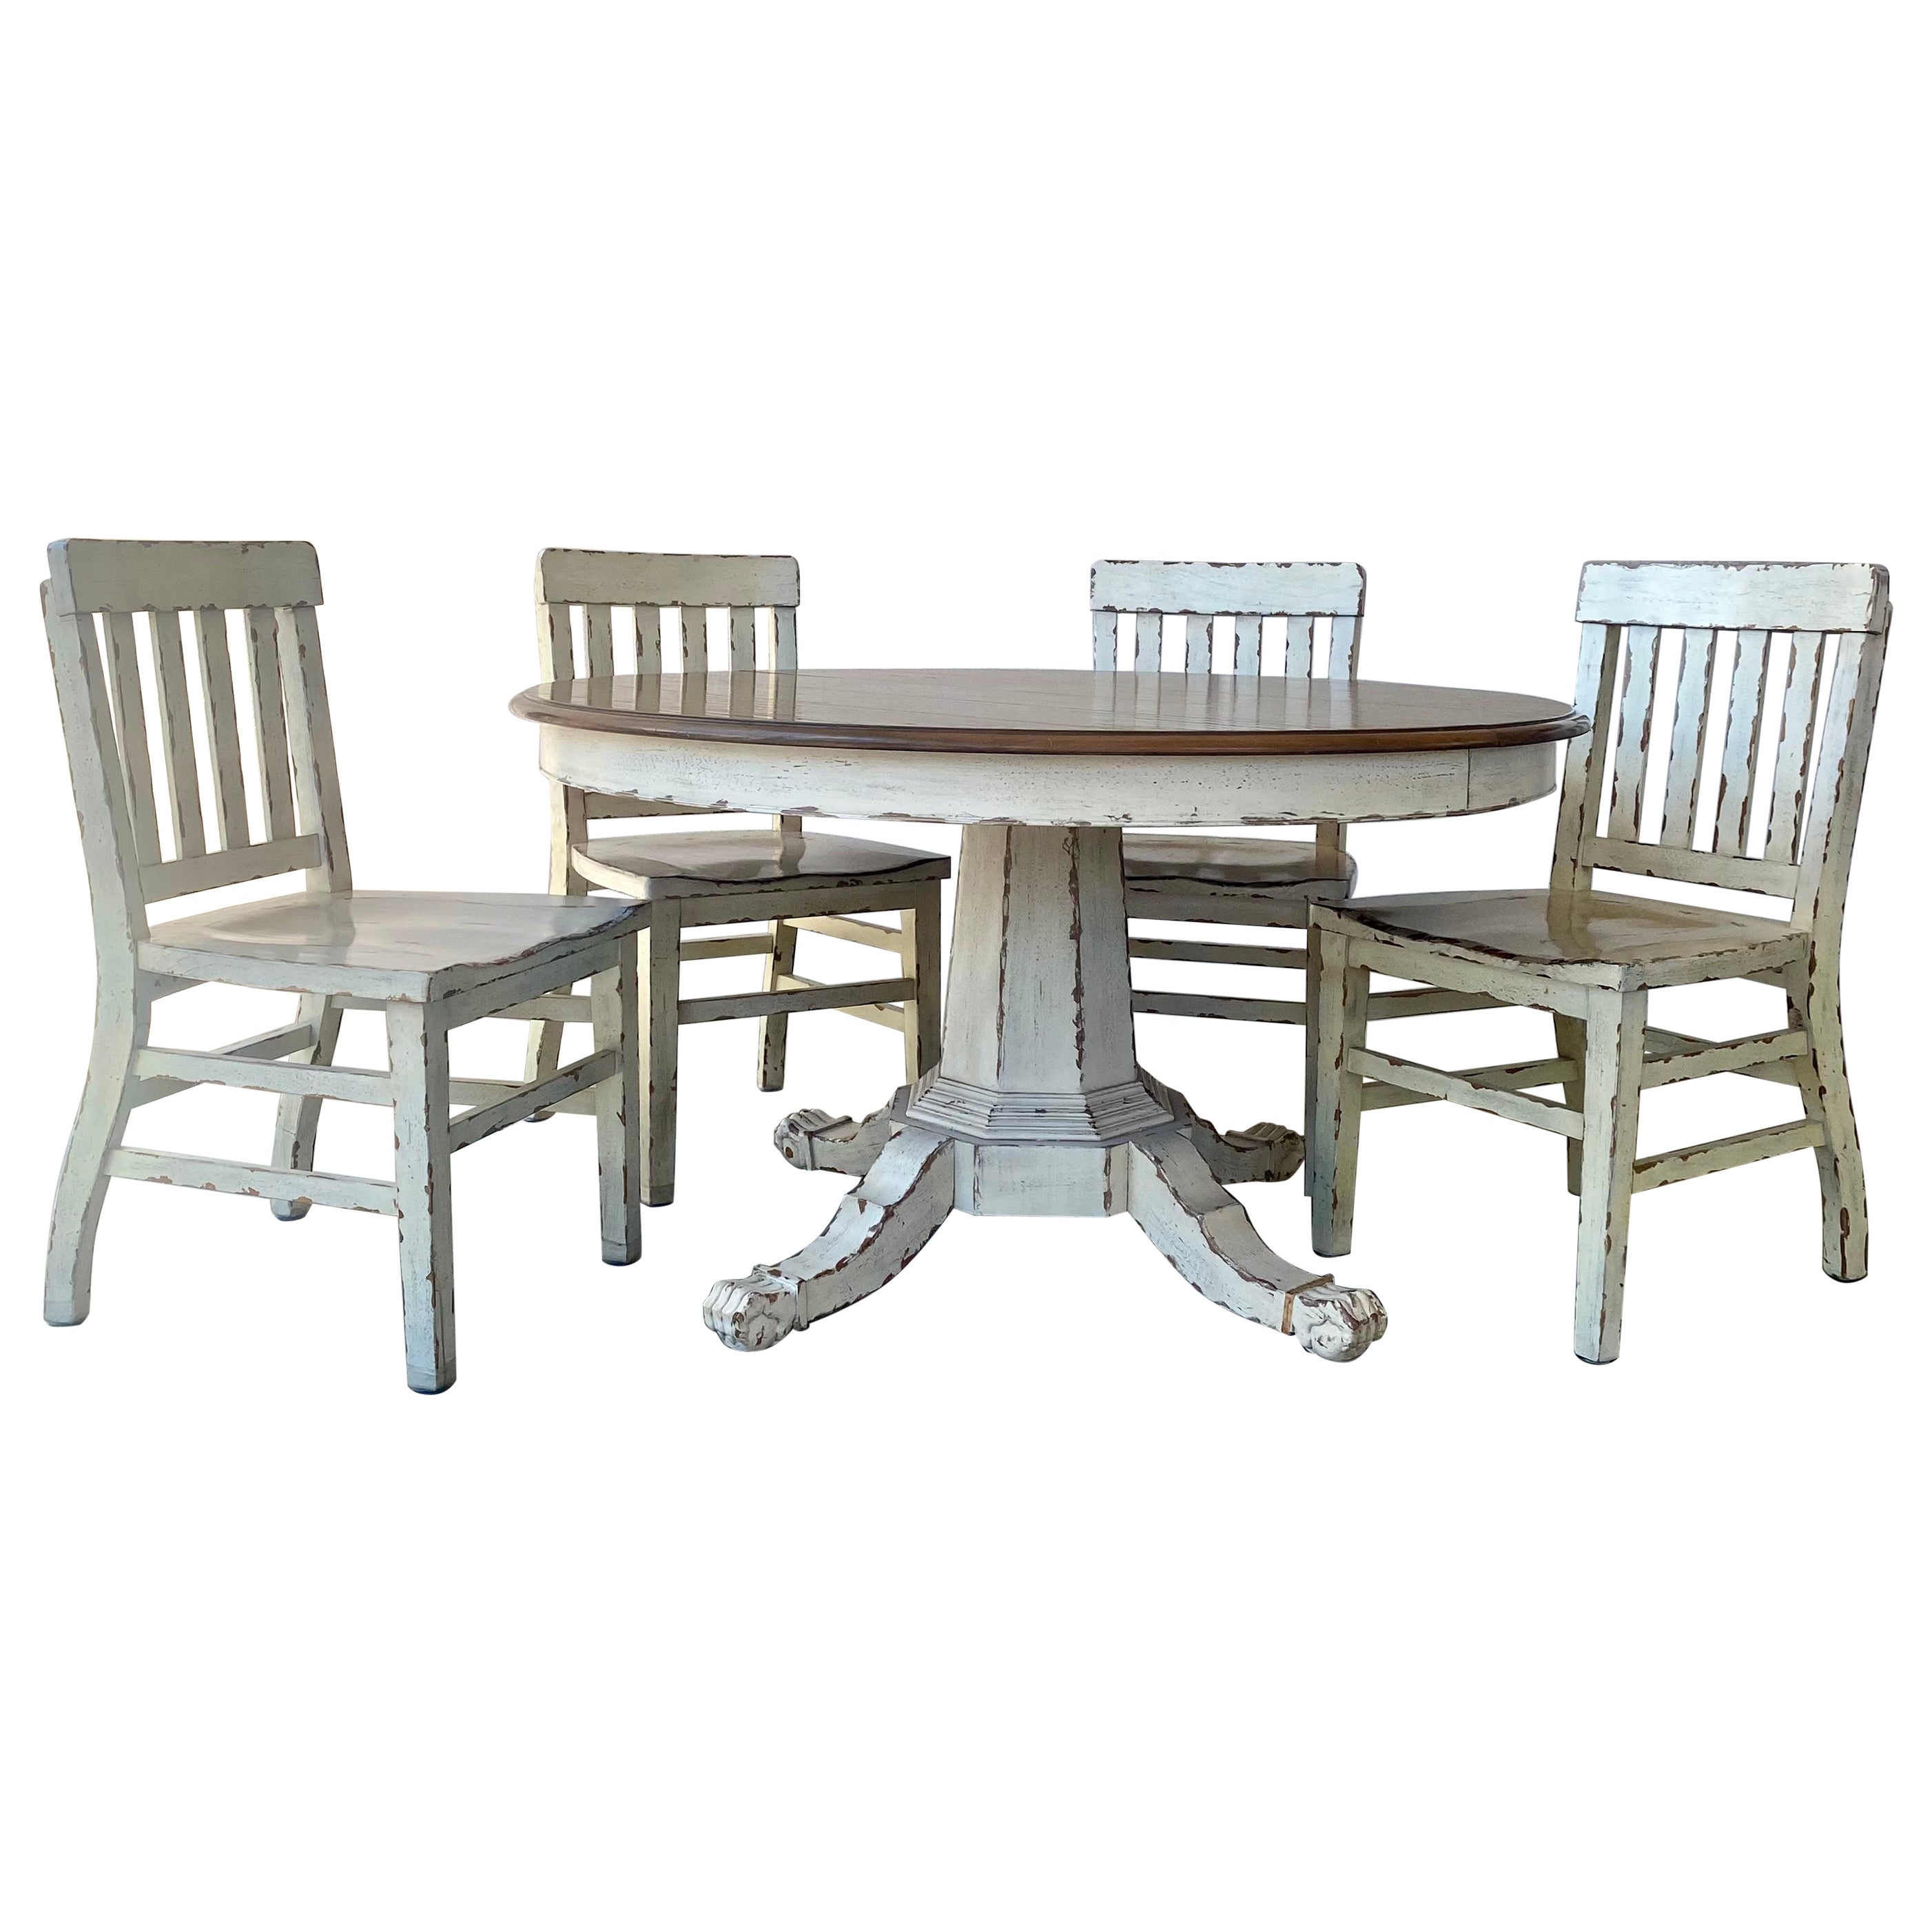 Ralph Lauren Oval Round Extending Farm Rustic Claw Feet Dining Set, 7 Pieces For Sale